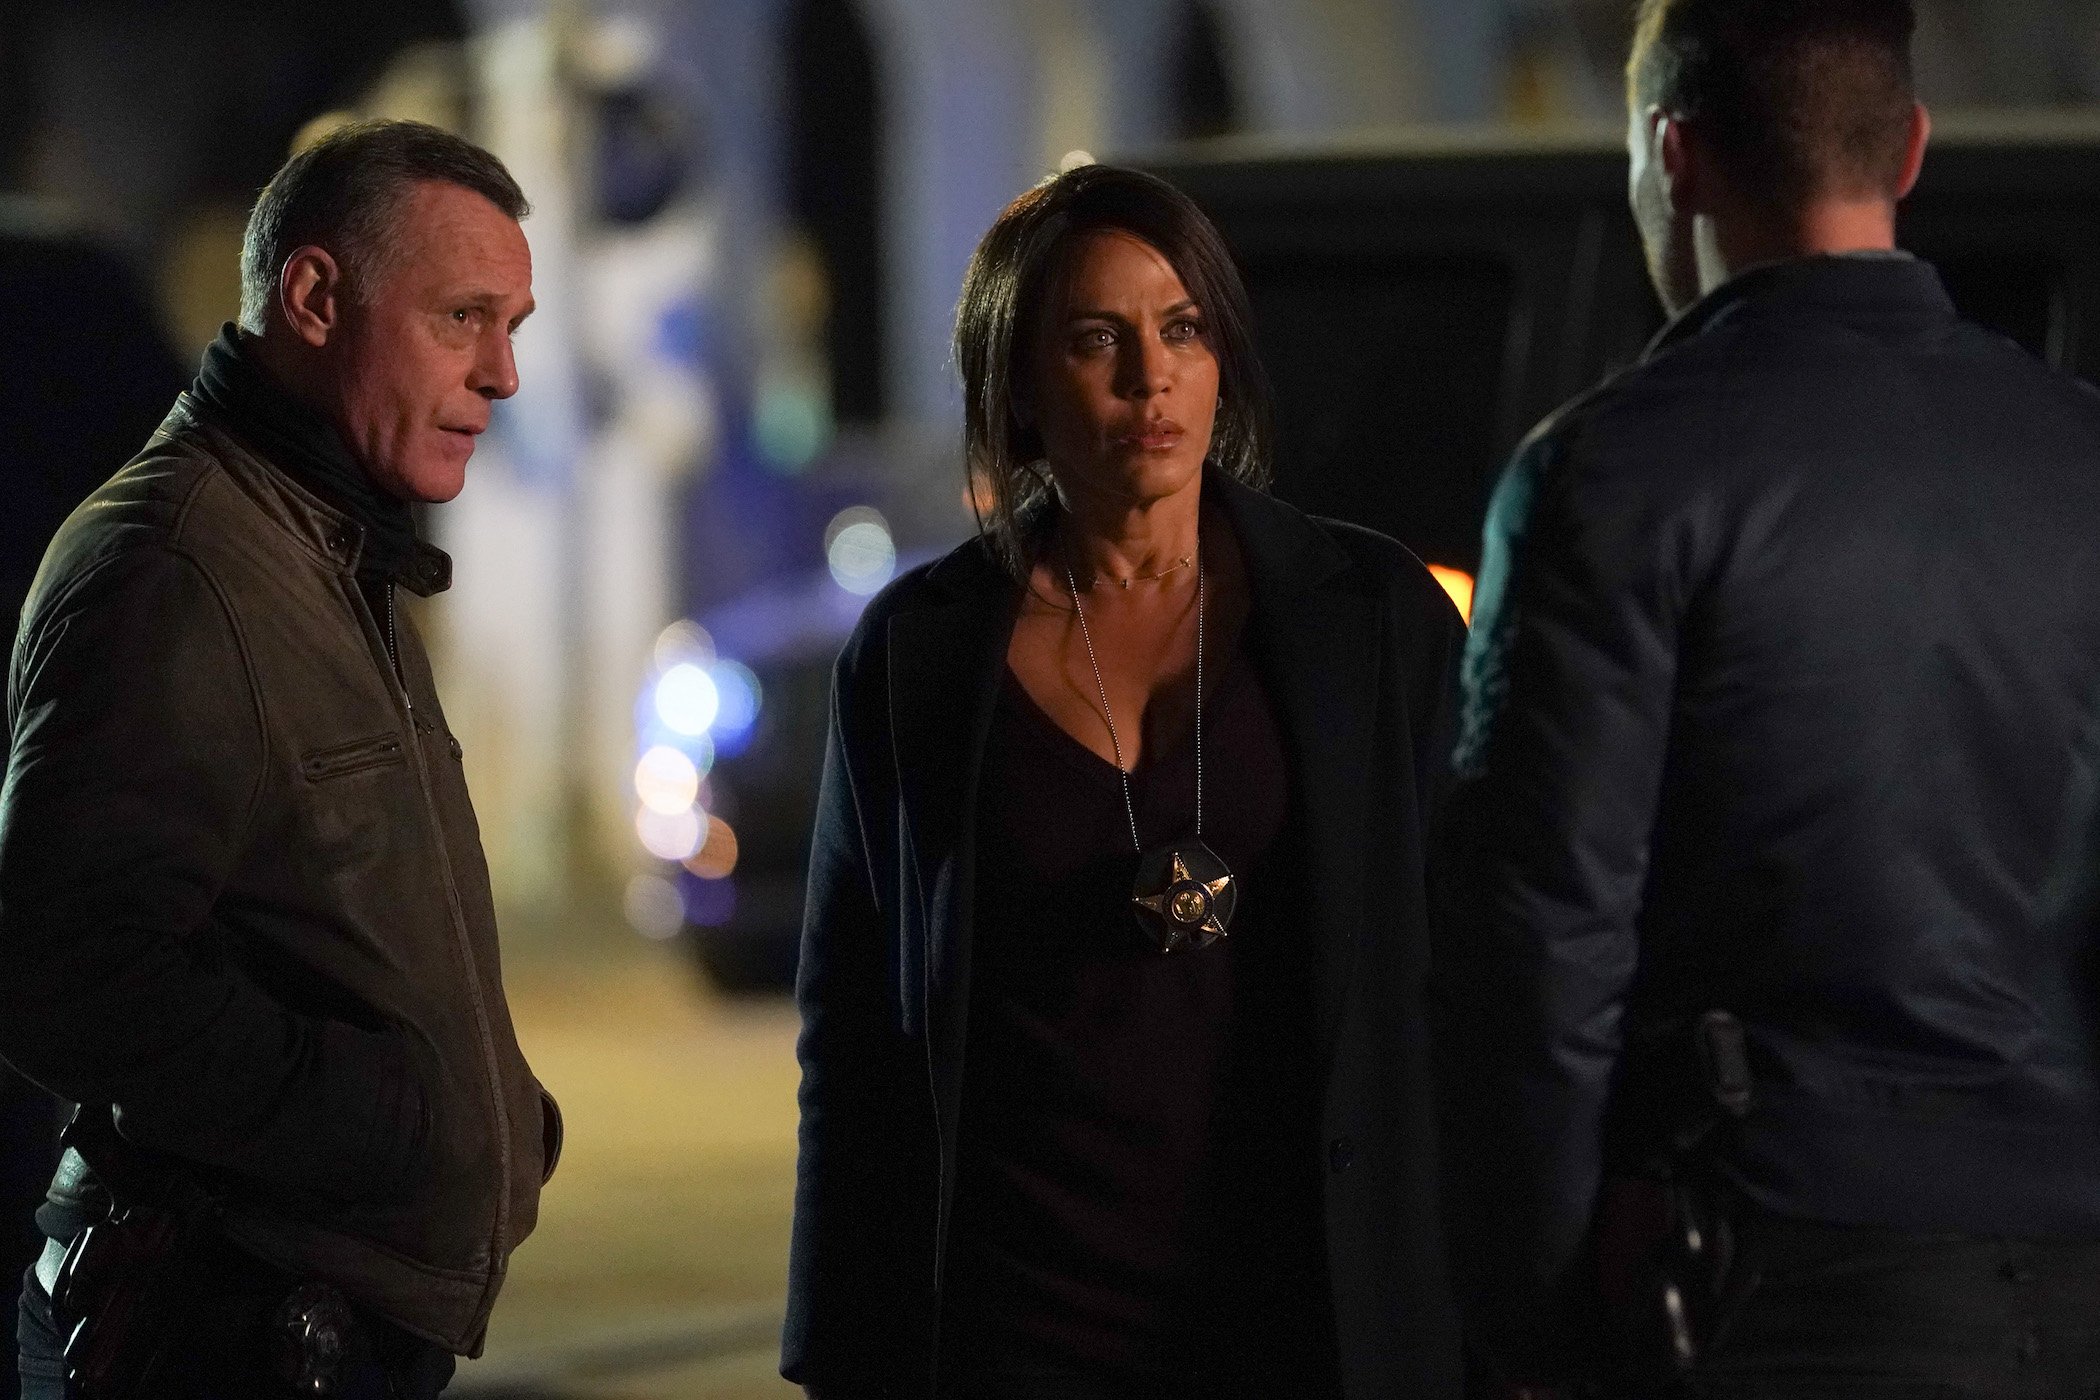 Jason Beghe as Hank Voight and Nicole Ari Parker as Samantha Miller in 'Chicago P.D.'